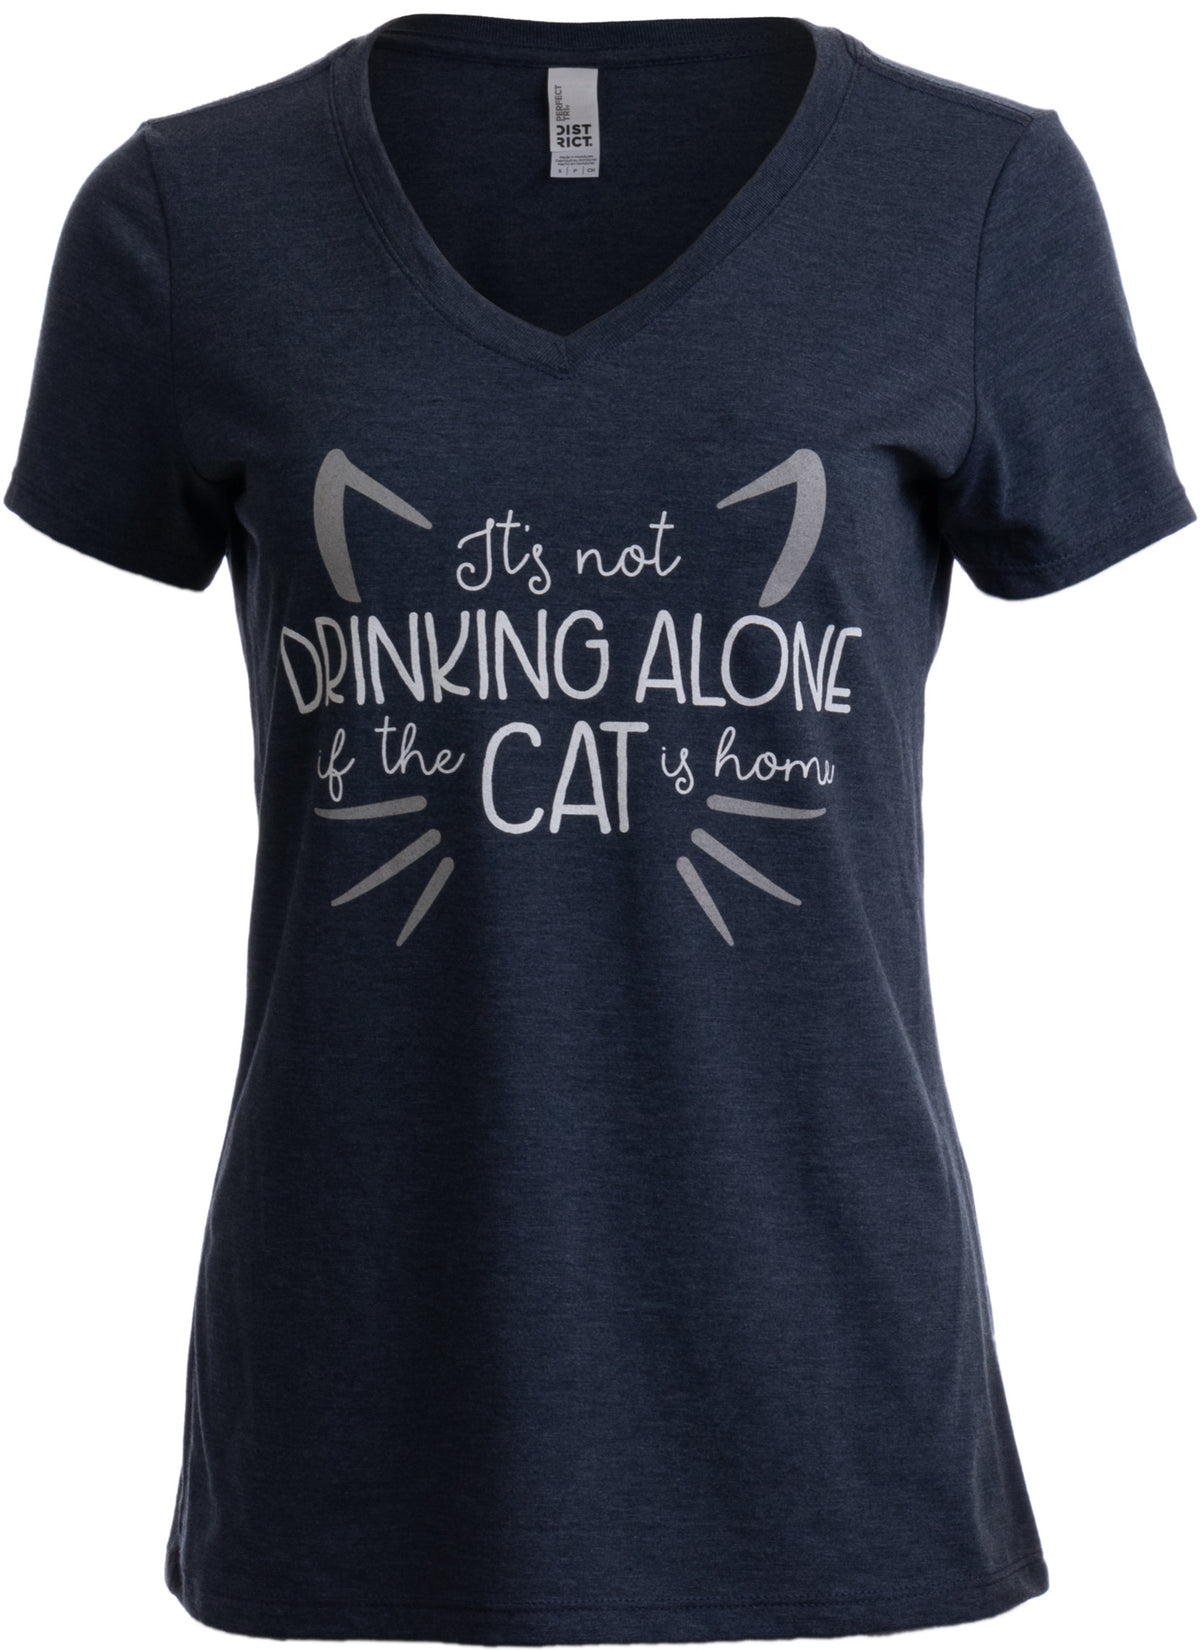 It's Not Drinking Alone if Cat is Home | Funny Joke Fun V-neck T-shirt for Women